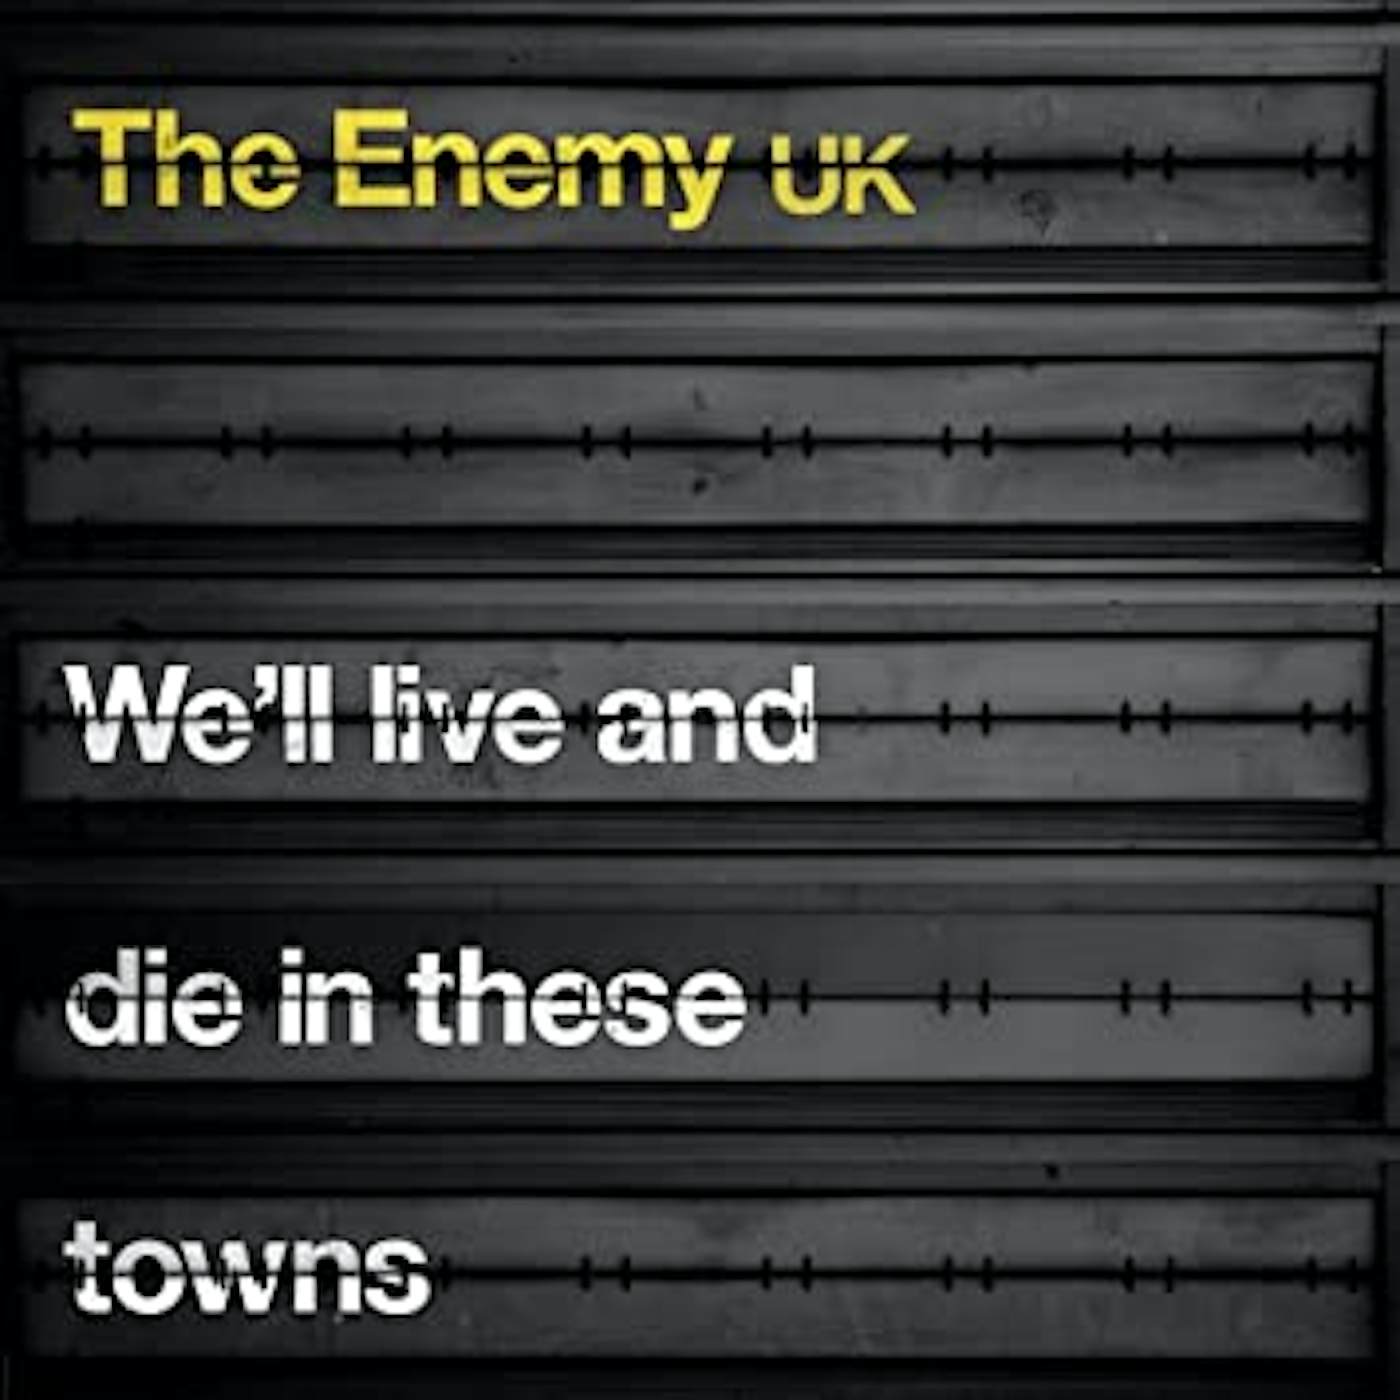 The Enemy WELL LIVE & DIE IN THESE TOWNS CD